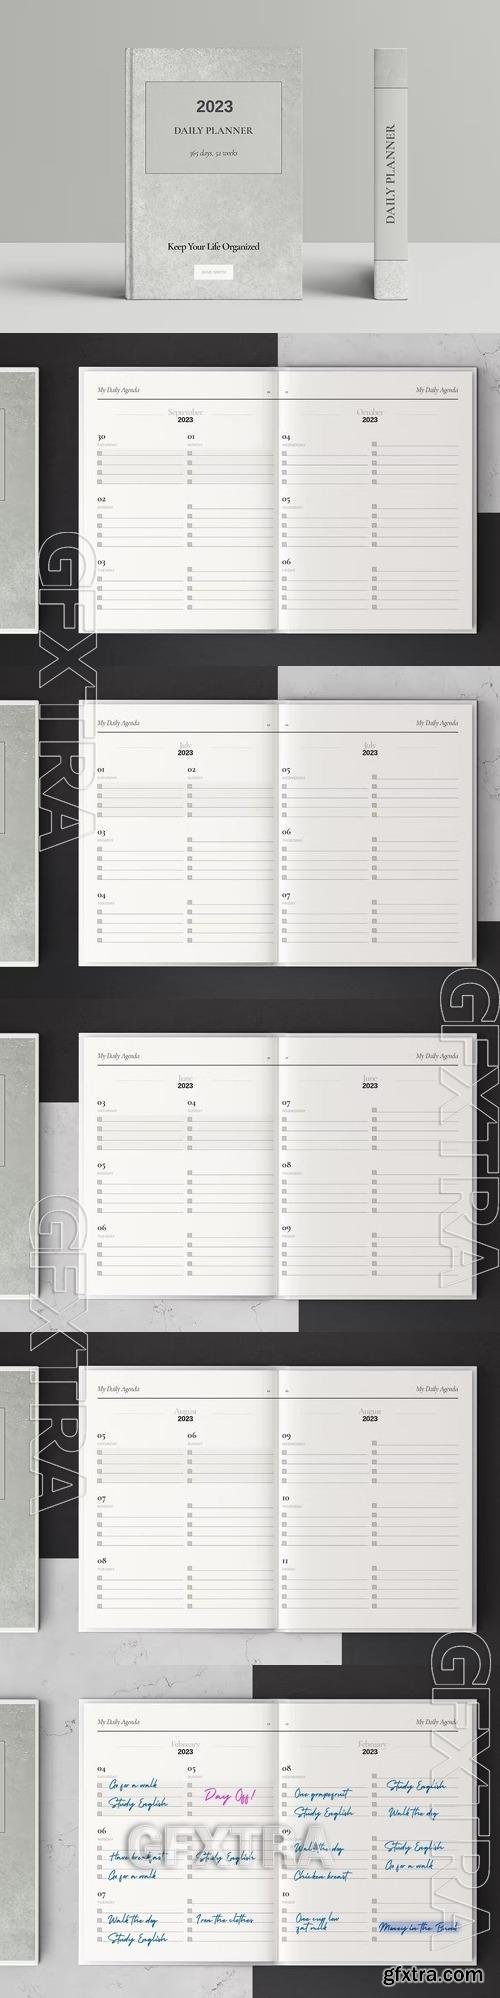 Planner 2023 Template FUEU2DH